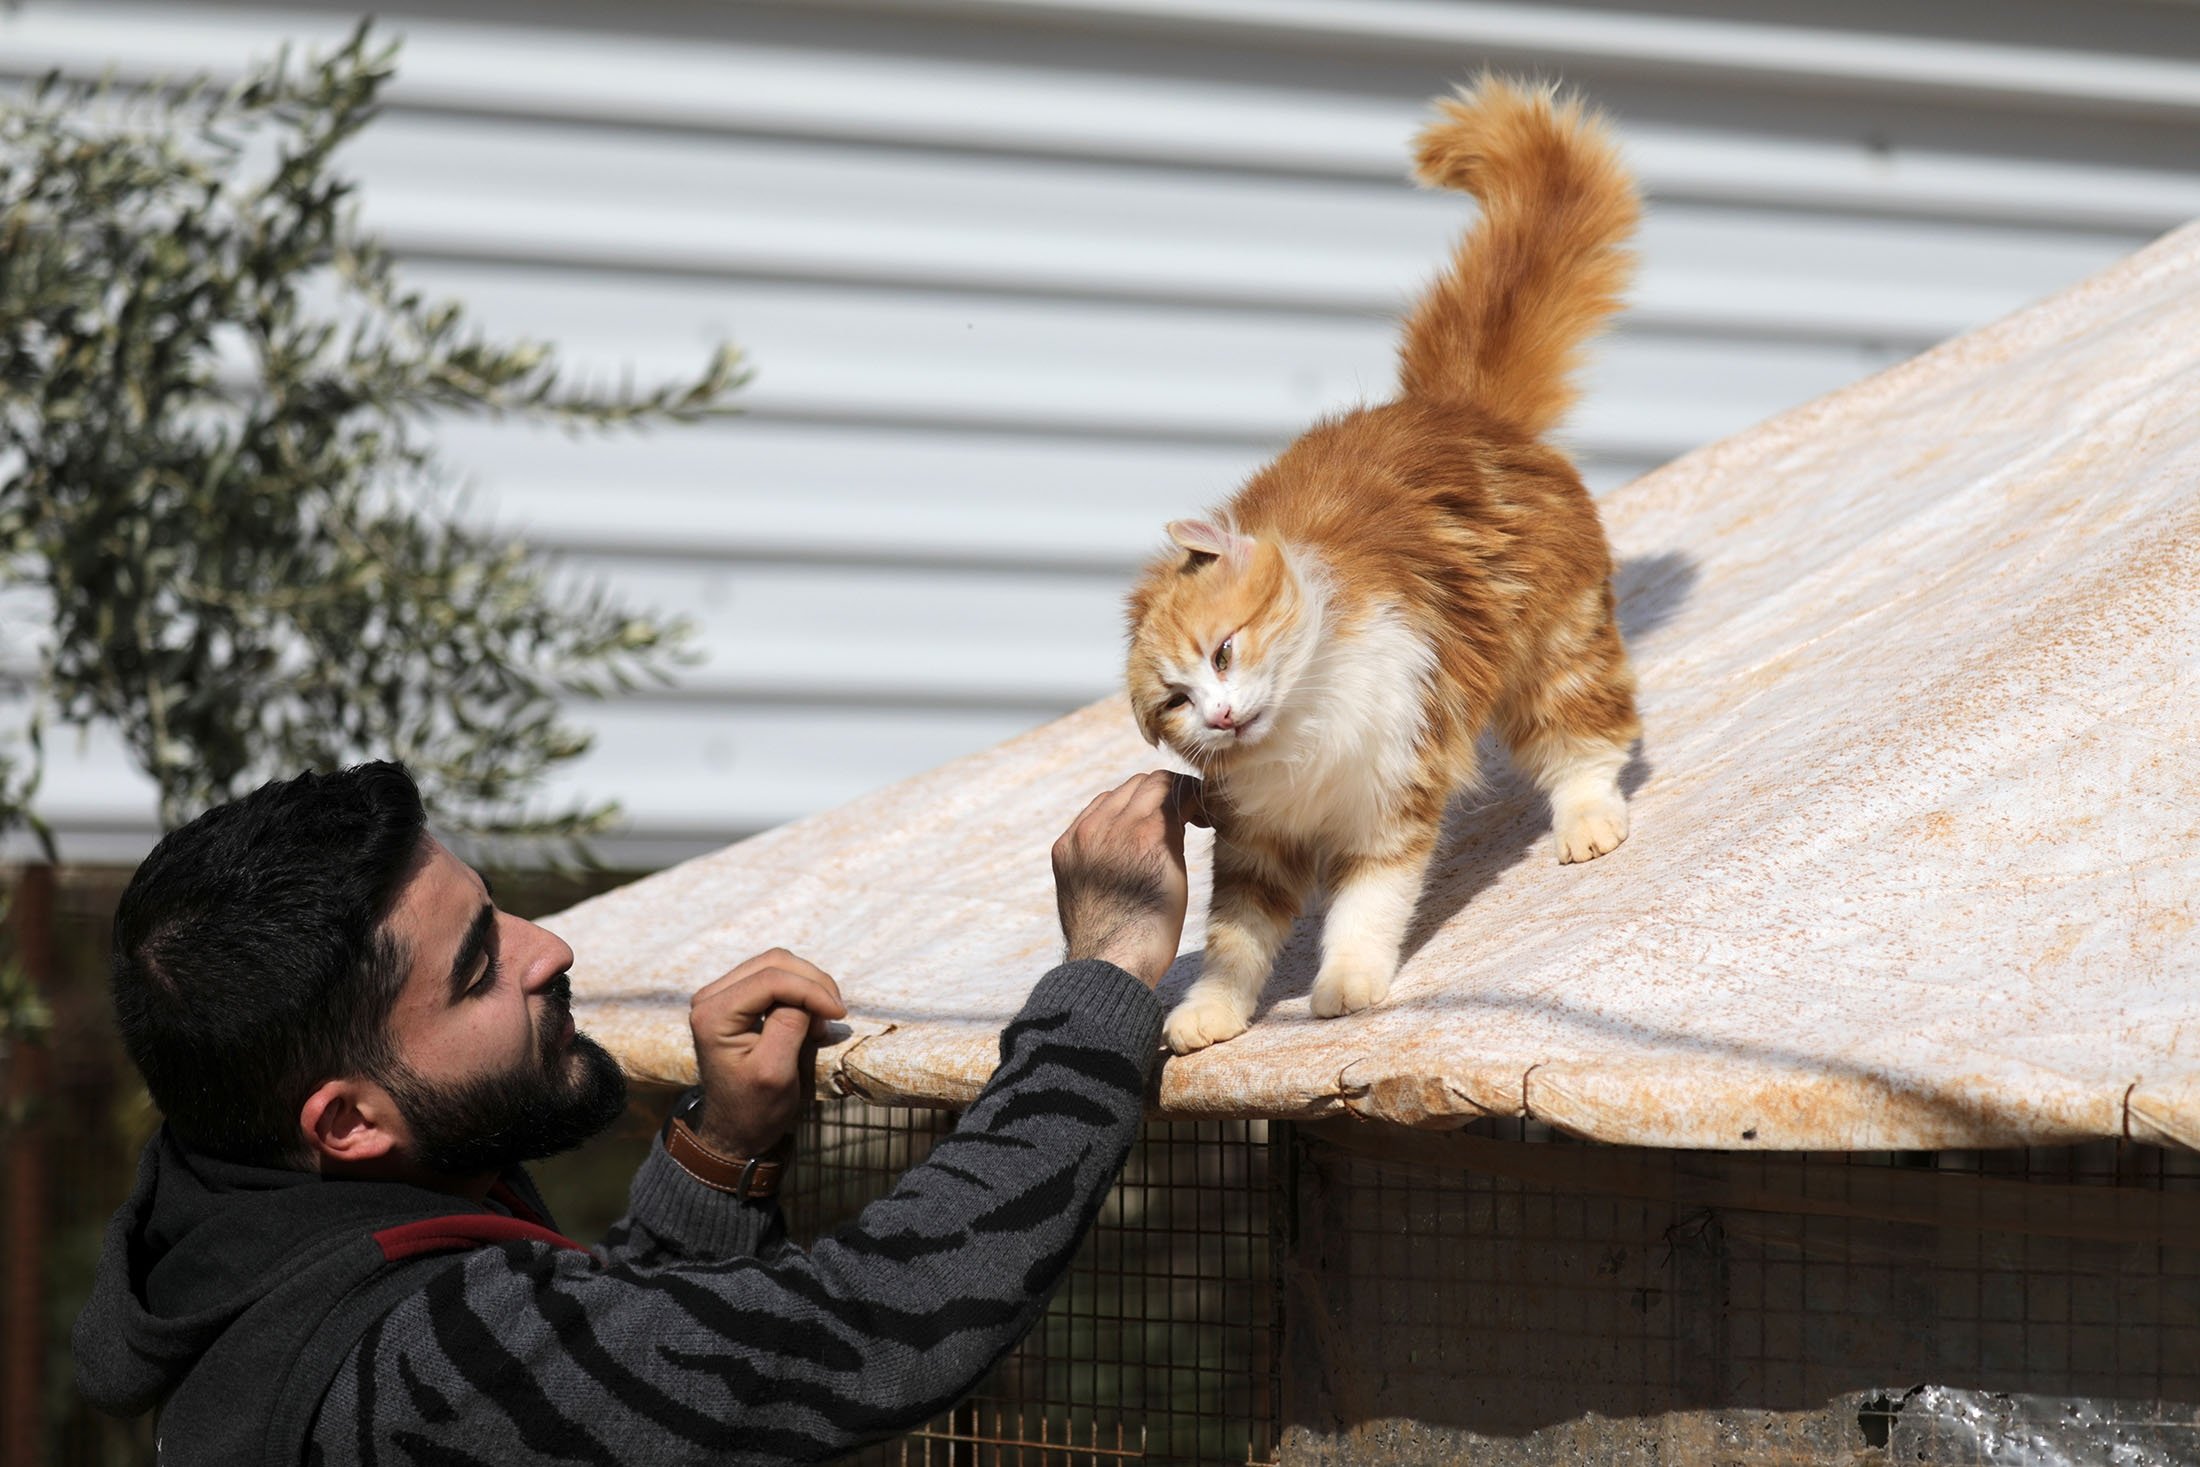 Syrian cat sanctuary home to over 1,000 felines stranded by war | Daily  Sabah